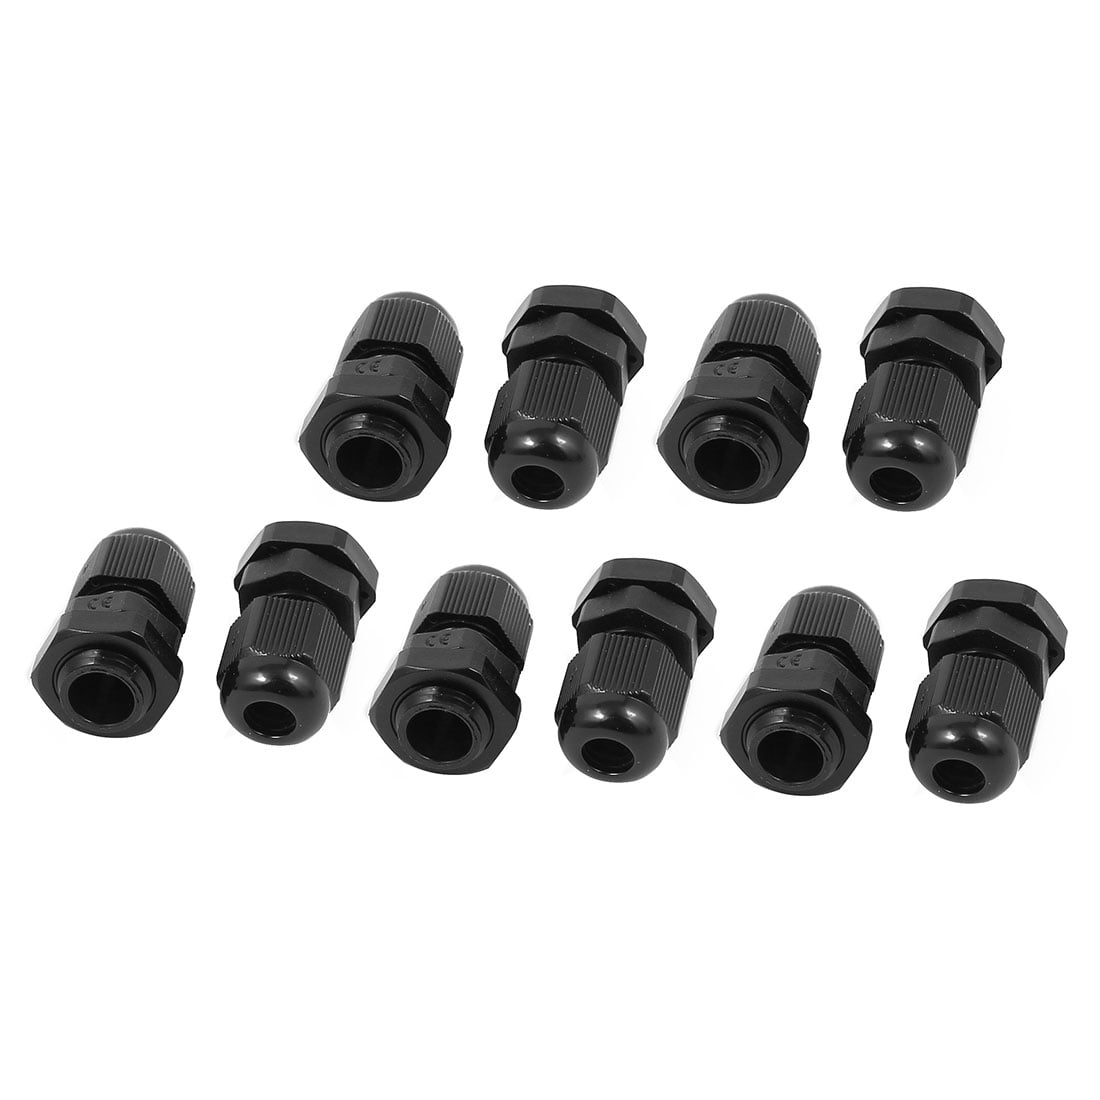 PG7 Waterproof IP68 Safety Nylon Cable Gland Connector Joints Black 20pcs 